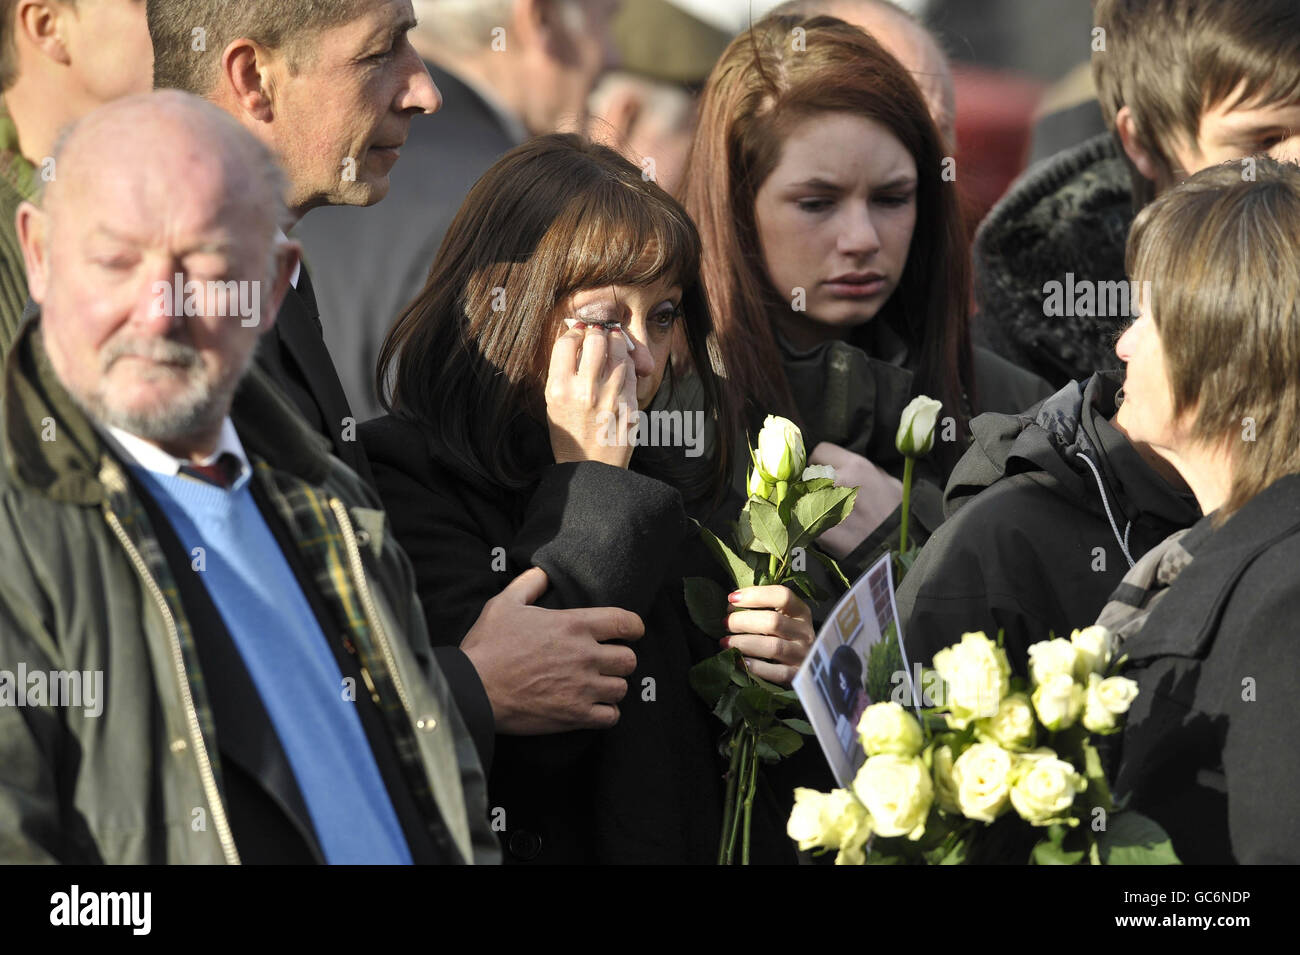 Mourners weep at a repatriation through the Wiltshire town of Wootton Bassett as the bodies of Rifleman Philip Allen, 20, of 2nd Battalion The Rifles and Samuel John Bassett, 20, of 4th Battalion The Rifles pass through the High Street. Stock Photo